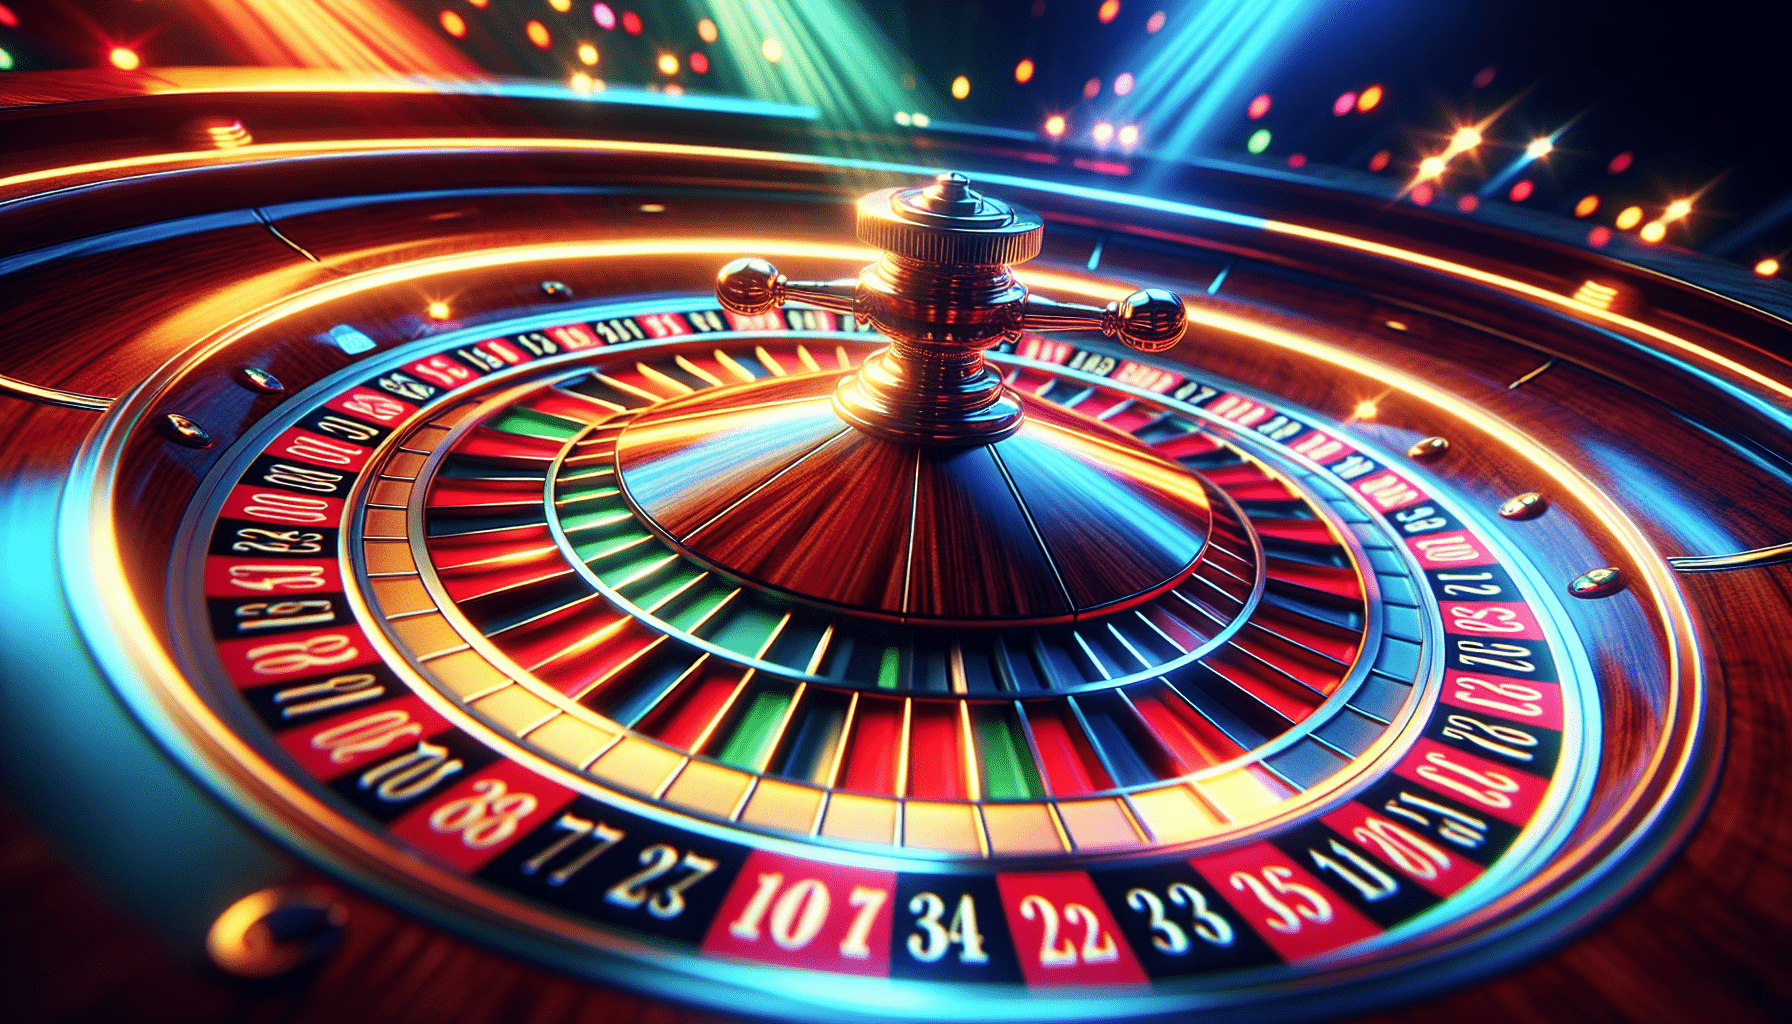 What Is The Highest Paid Out Online Casino?